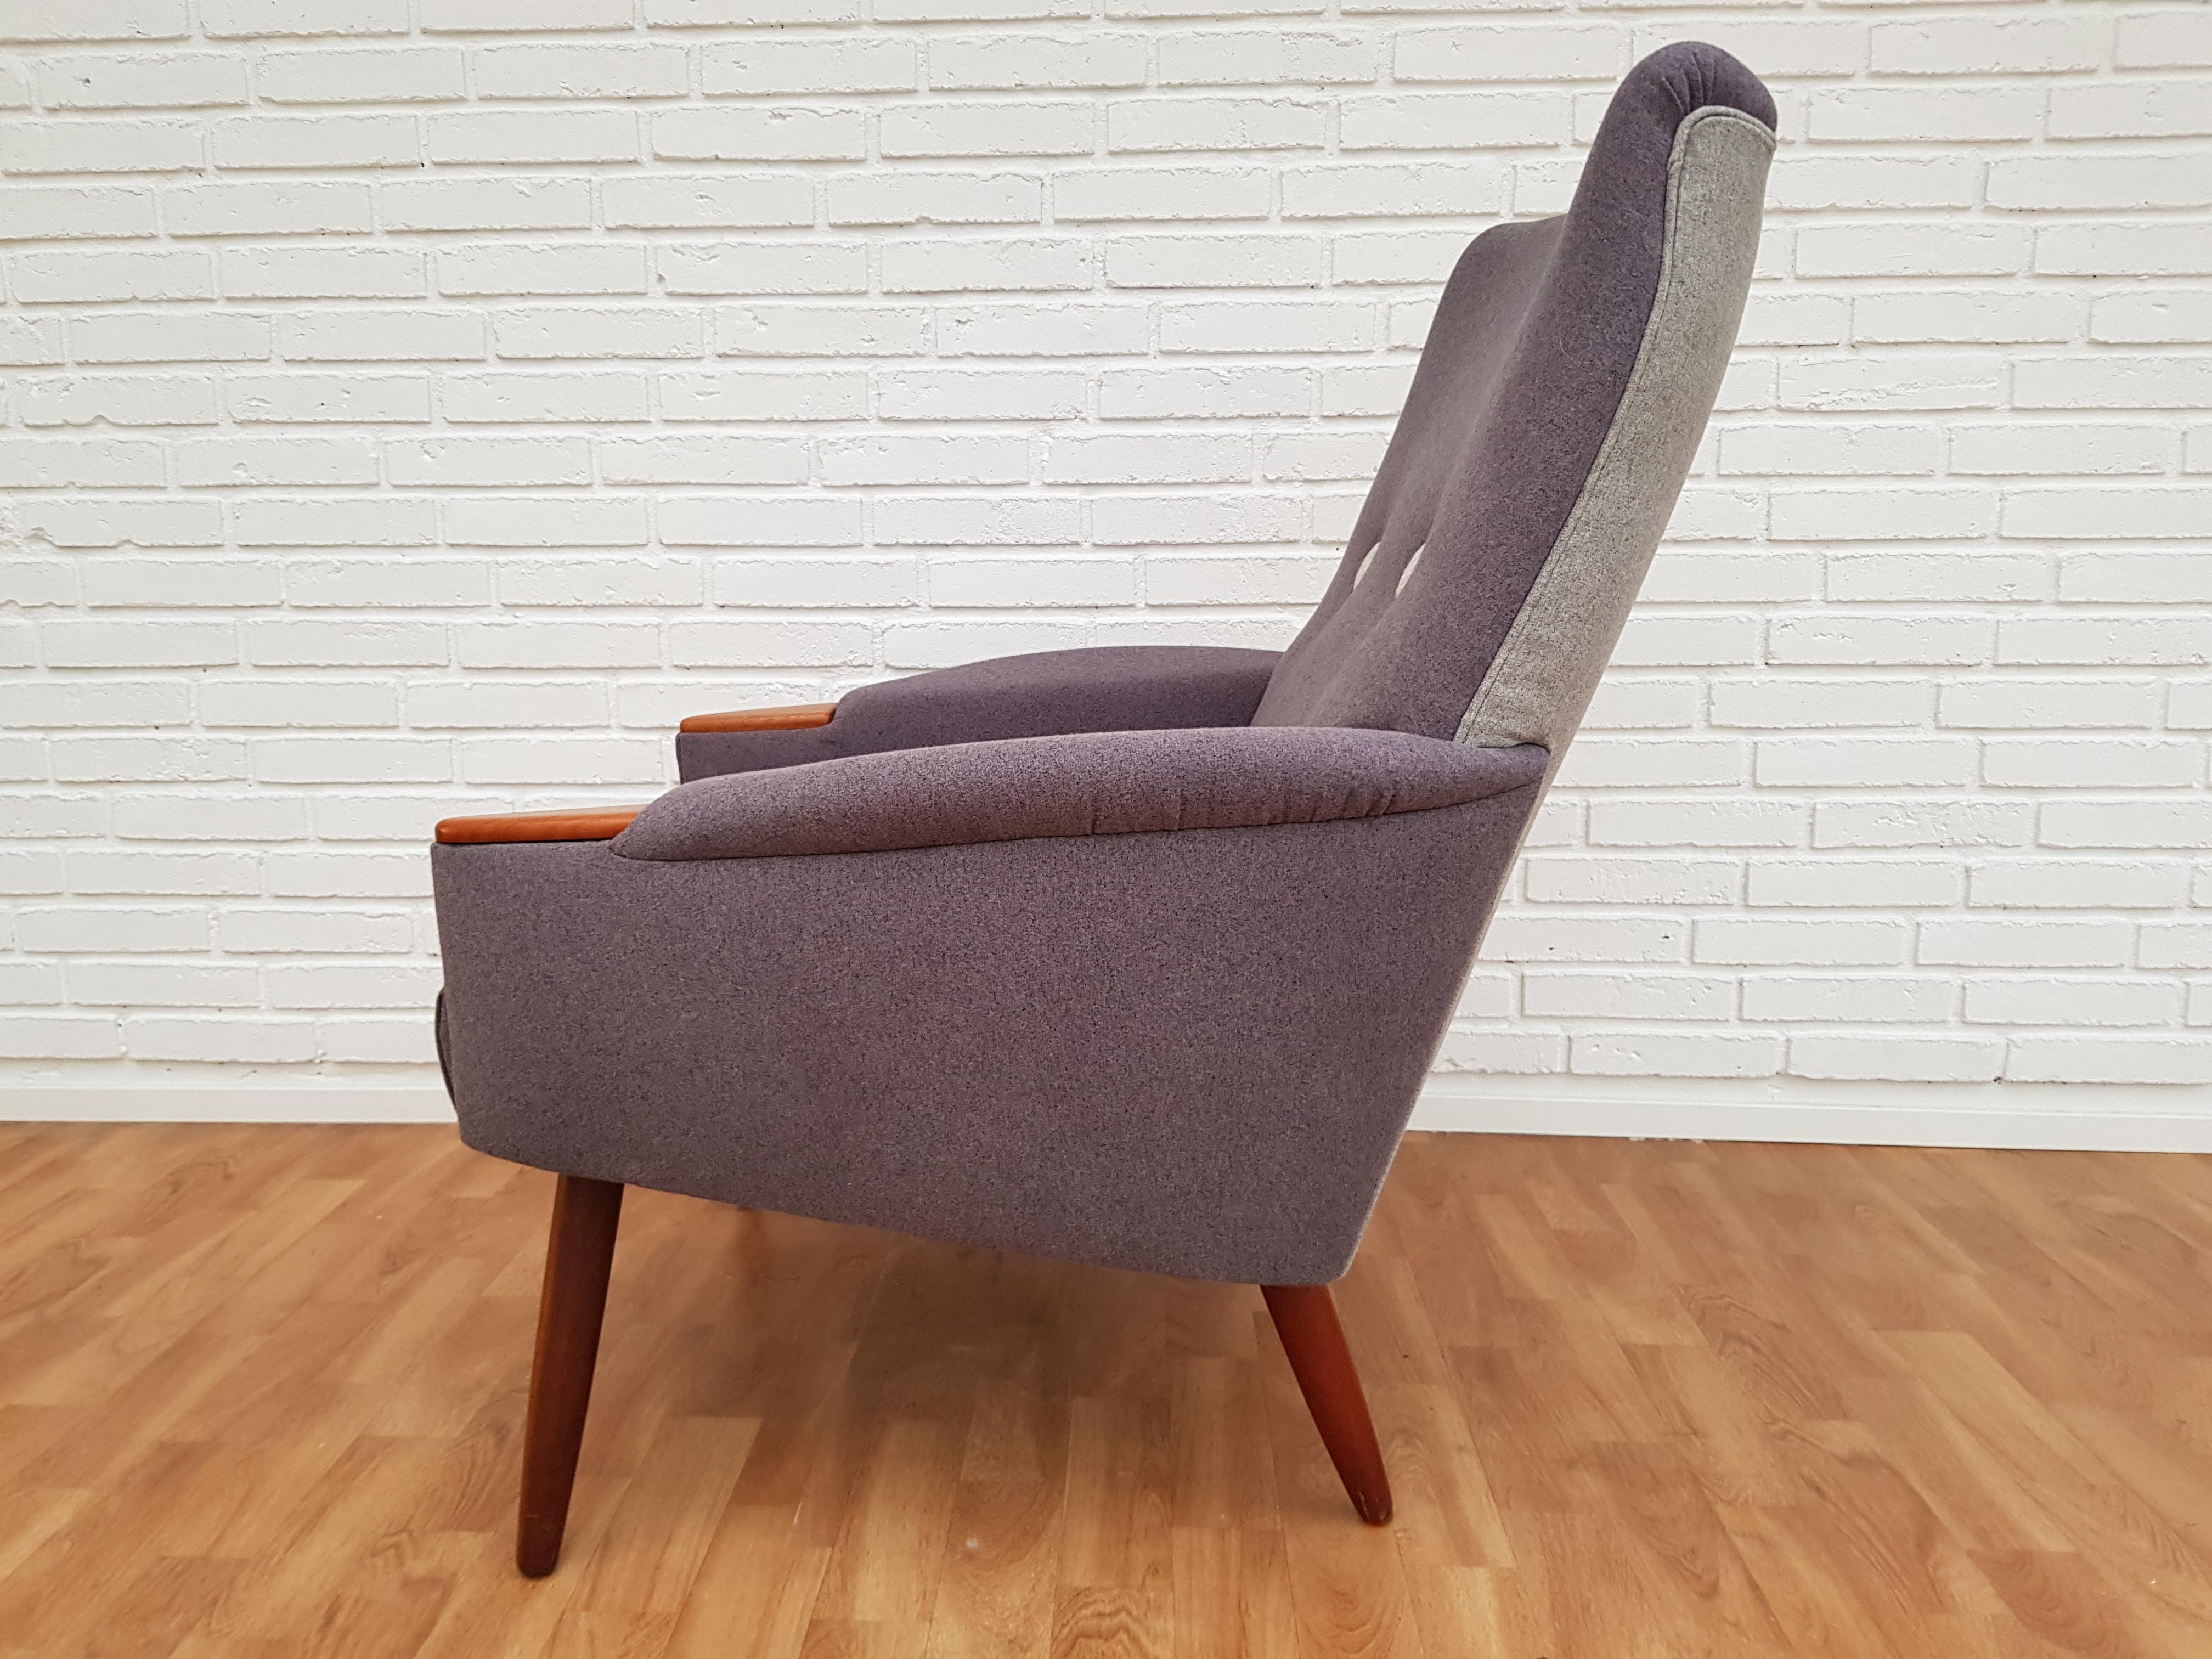 Mid-20th Century Danish Retro Lounge Chair, Nails and Legs Teakwood, Completely Restored For Sale